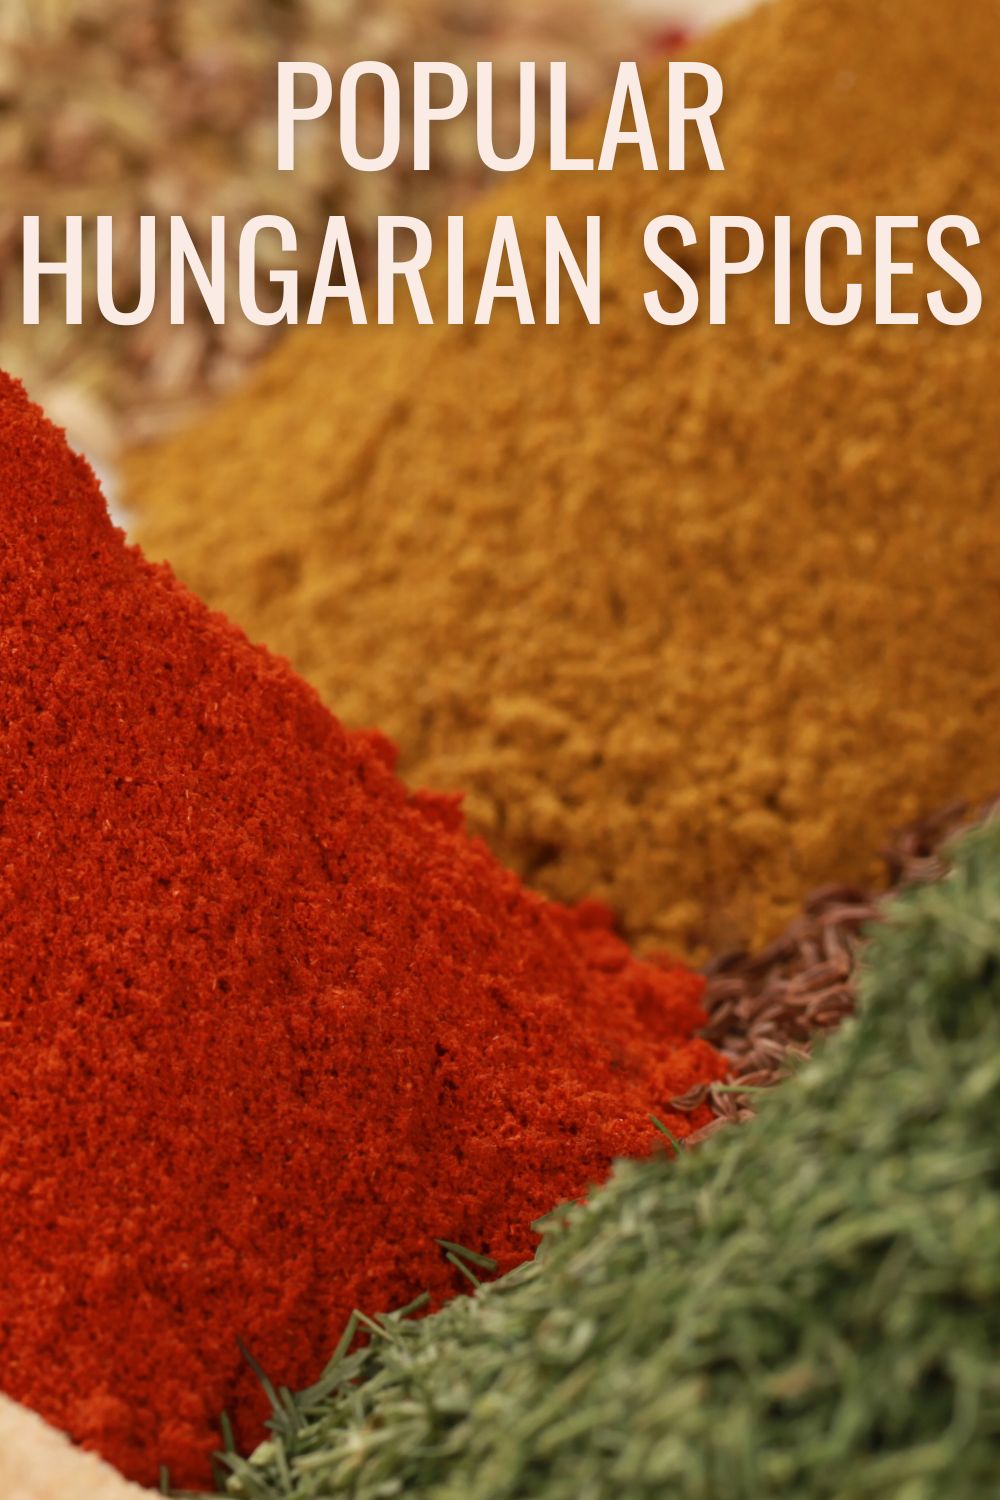 Popular Hungarian spices